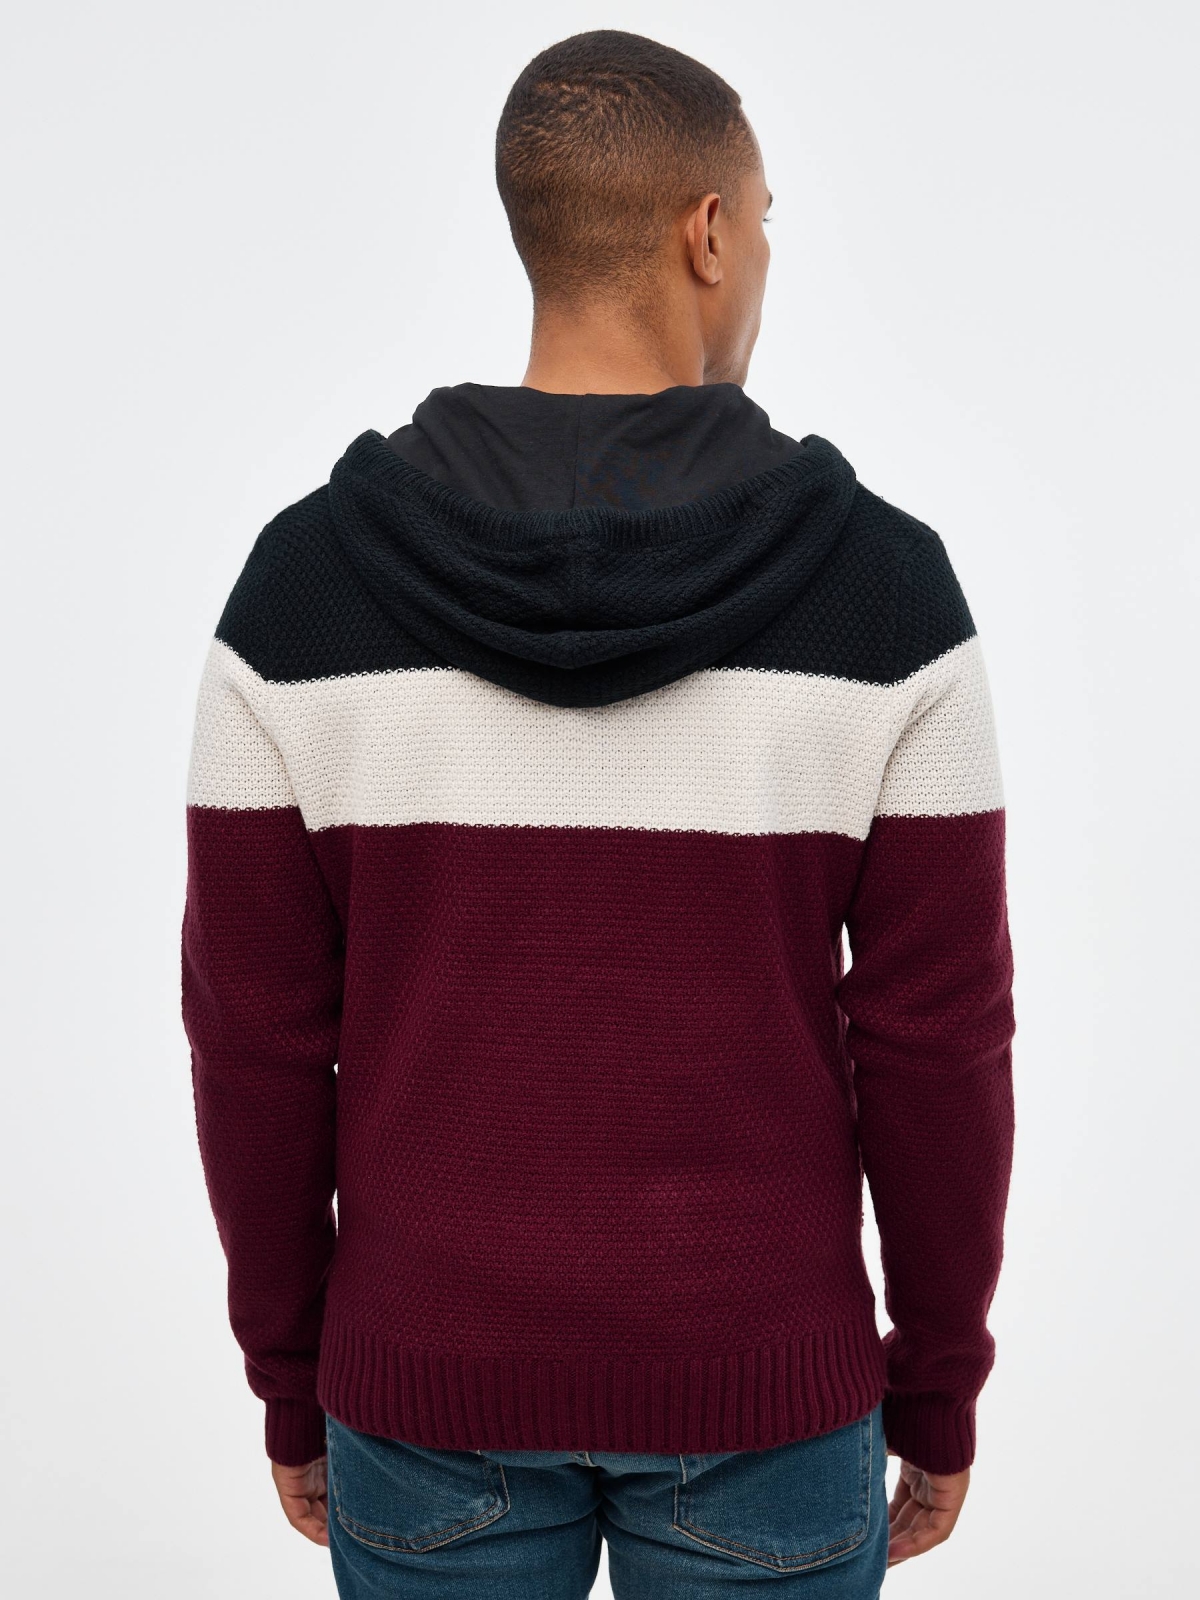 Hooded cardigan burgundy middle back view